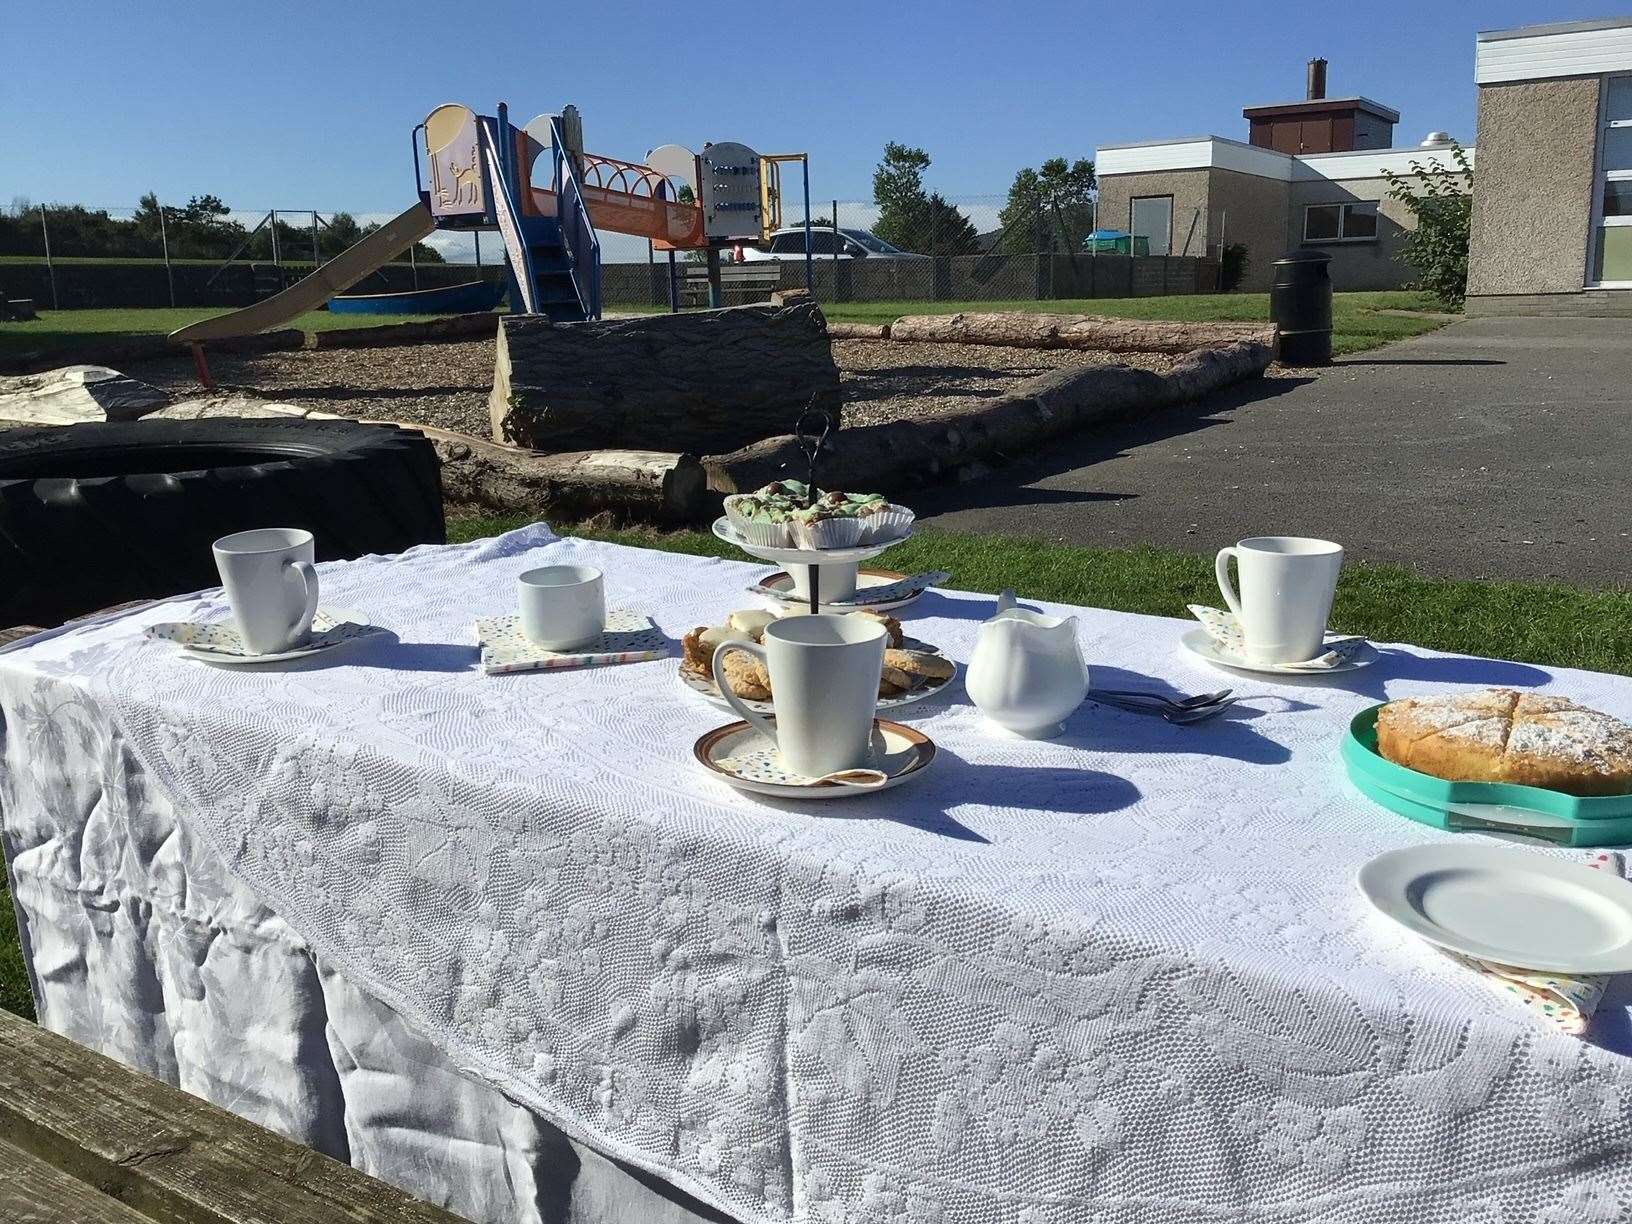 The scene is set for a cuppa and a chat. Picture: Cullen Primary